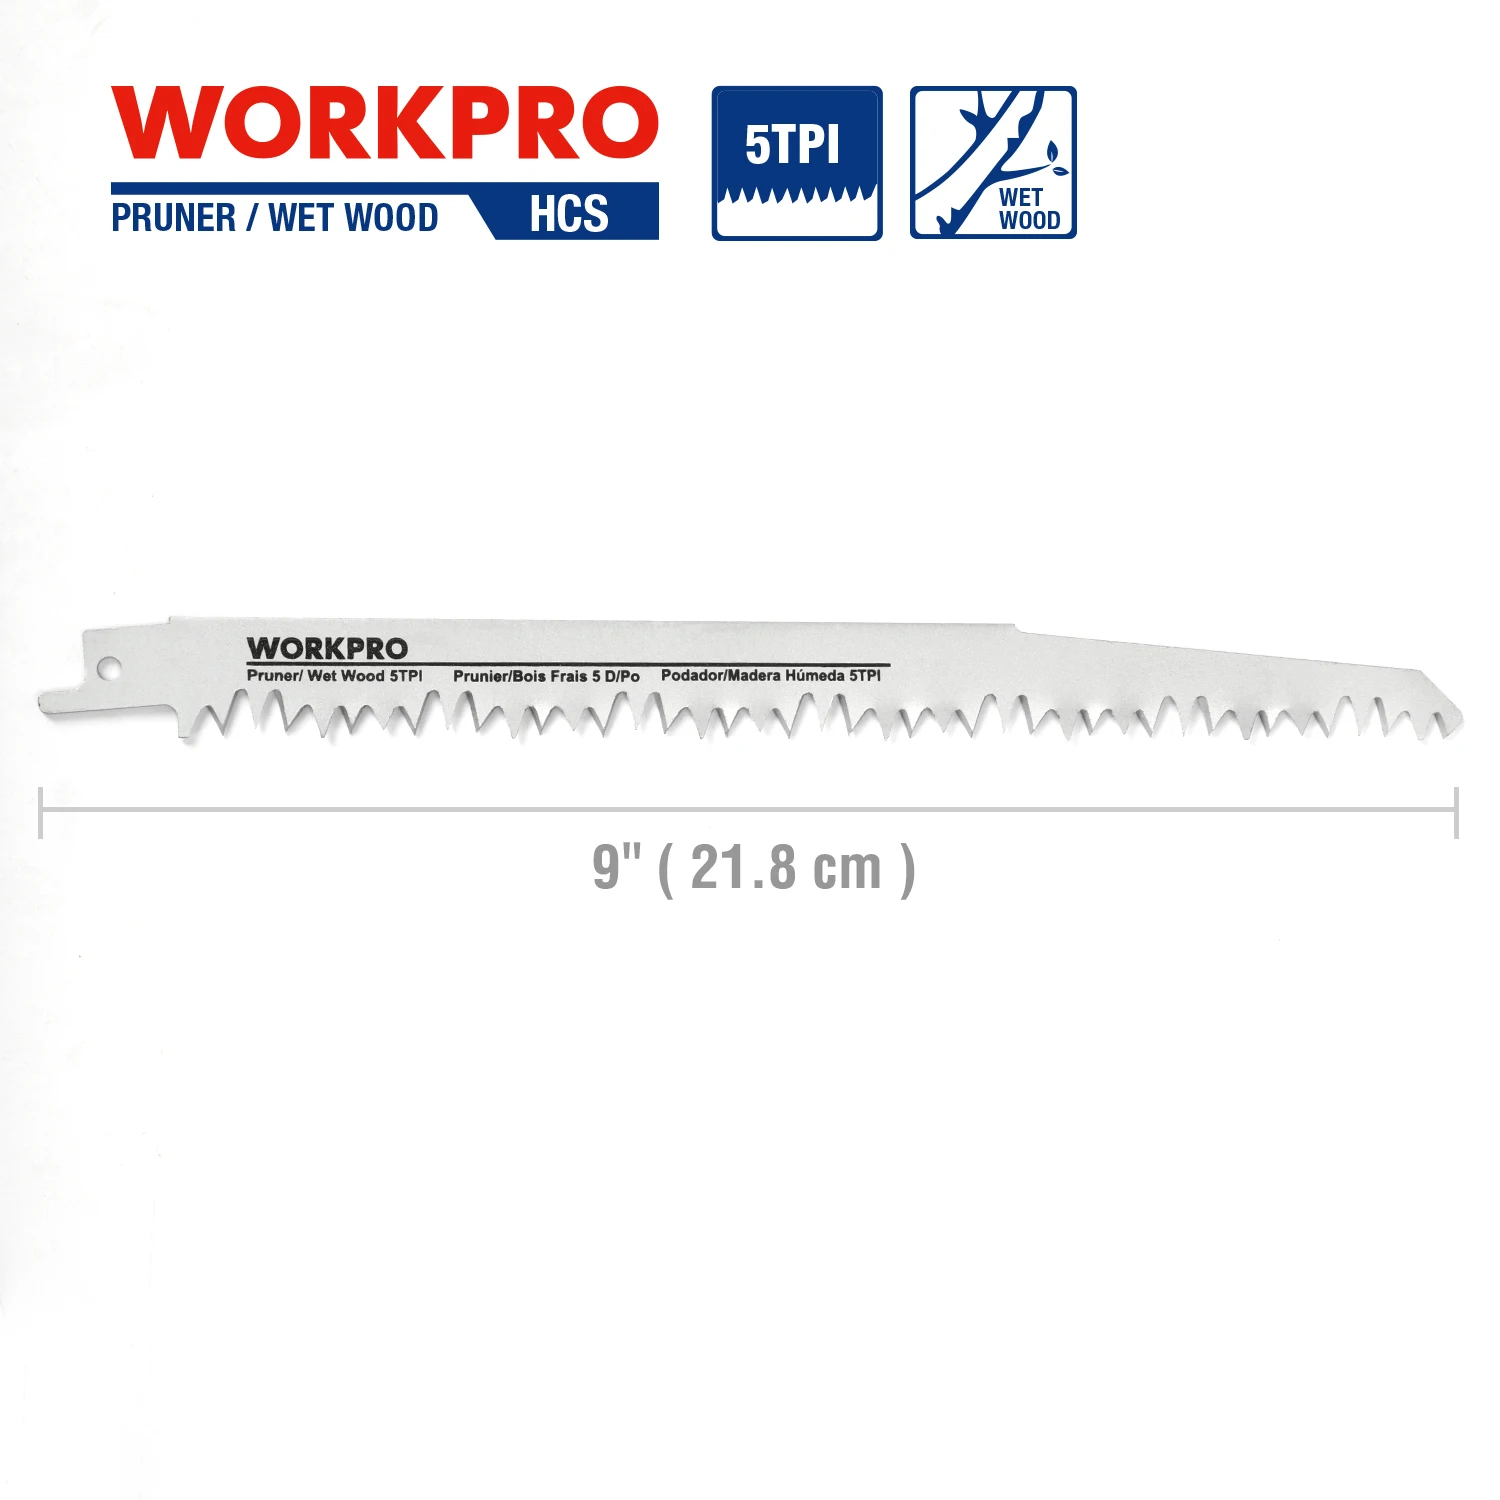 WORKPRO 5-piece Reciprocating Saw Blades Set Wood Cutting Set Fast Cutting Power Tools Accessories wilton vise